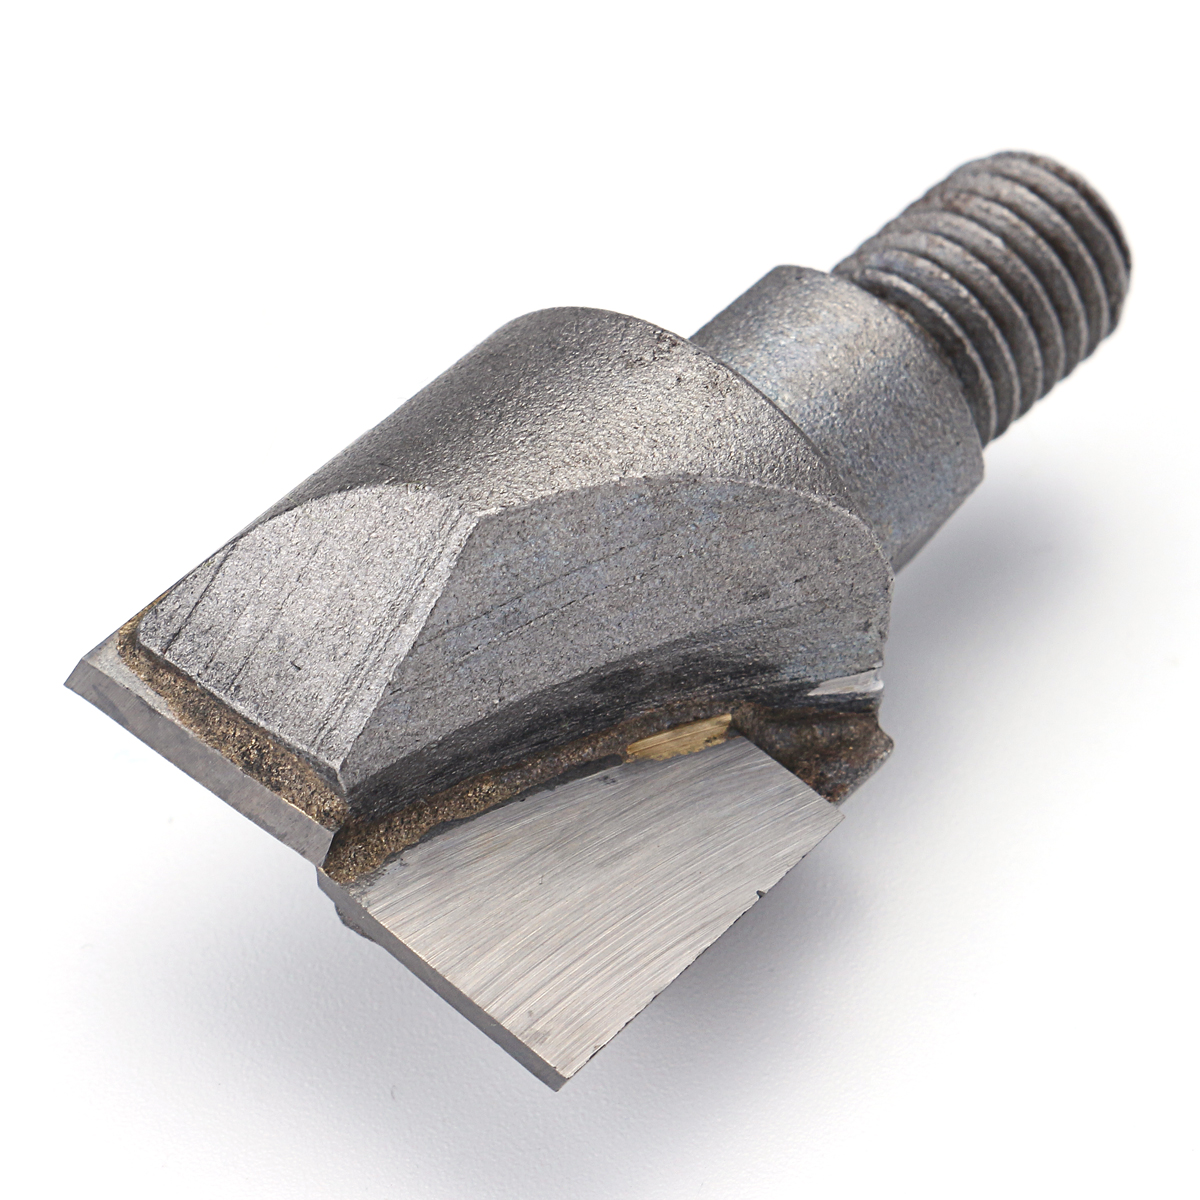 Drillpro-M10-165-30mm-Carbide-Soubers-Plunging-Cutter-Wood-Cutter-for-Soubers-Mortice-Lock-Fitting-J-1595958-4